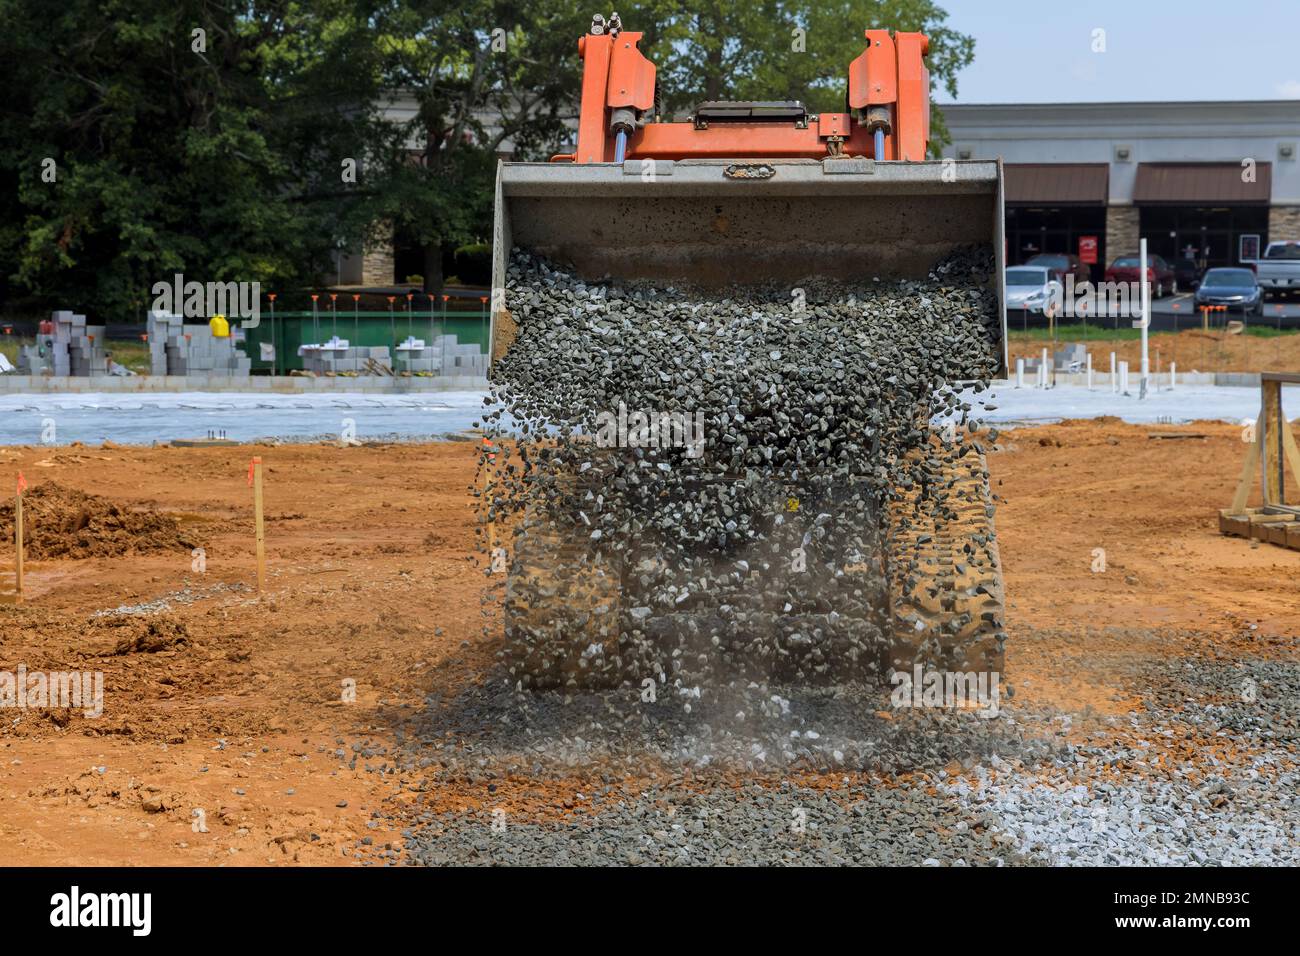 Bucket of crushed stone is being uploaded by an excavator into large scoop when bucket is full Stock Photo